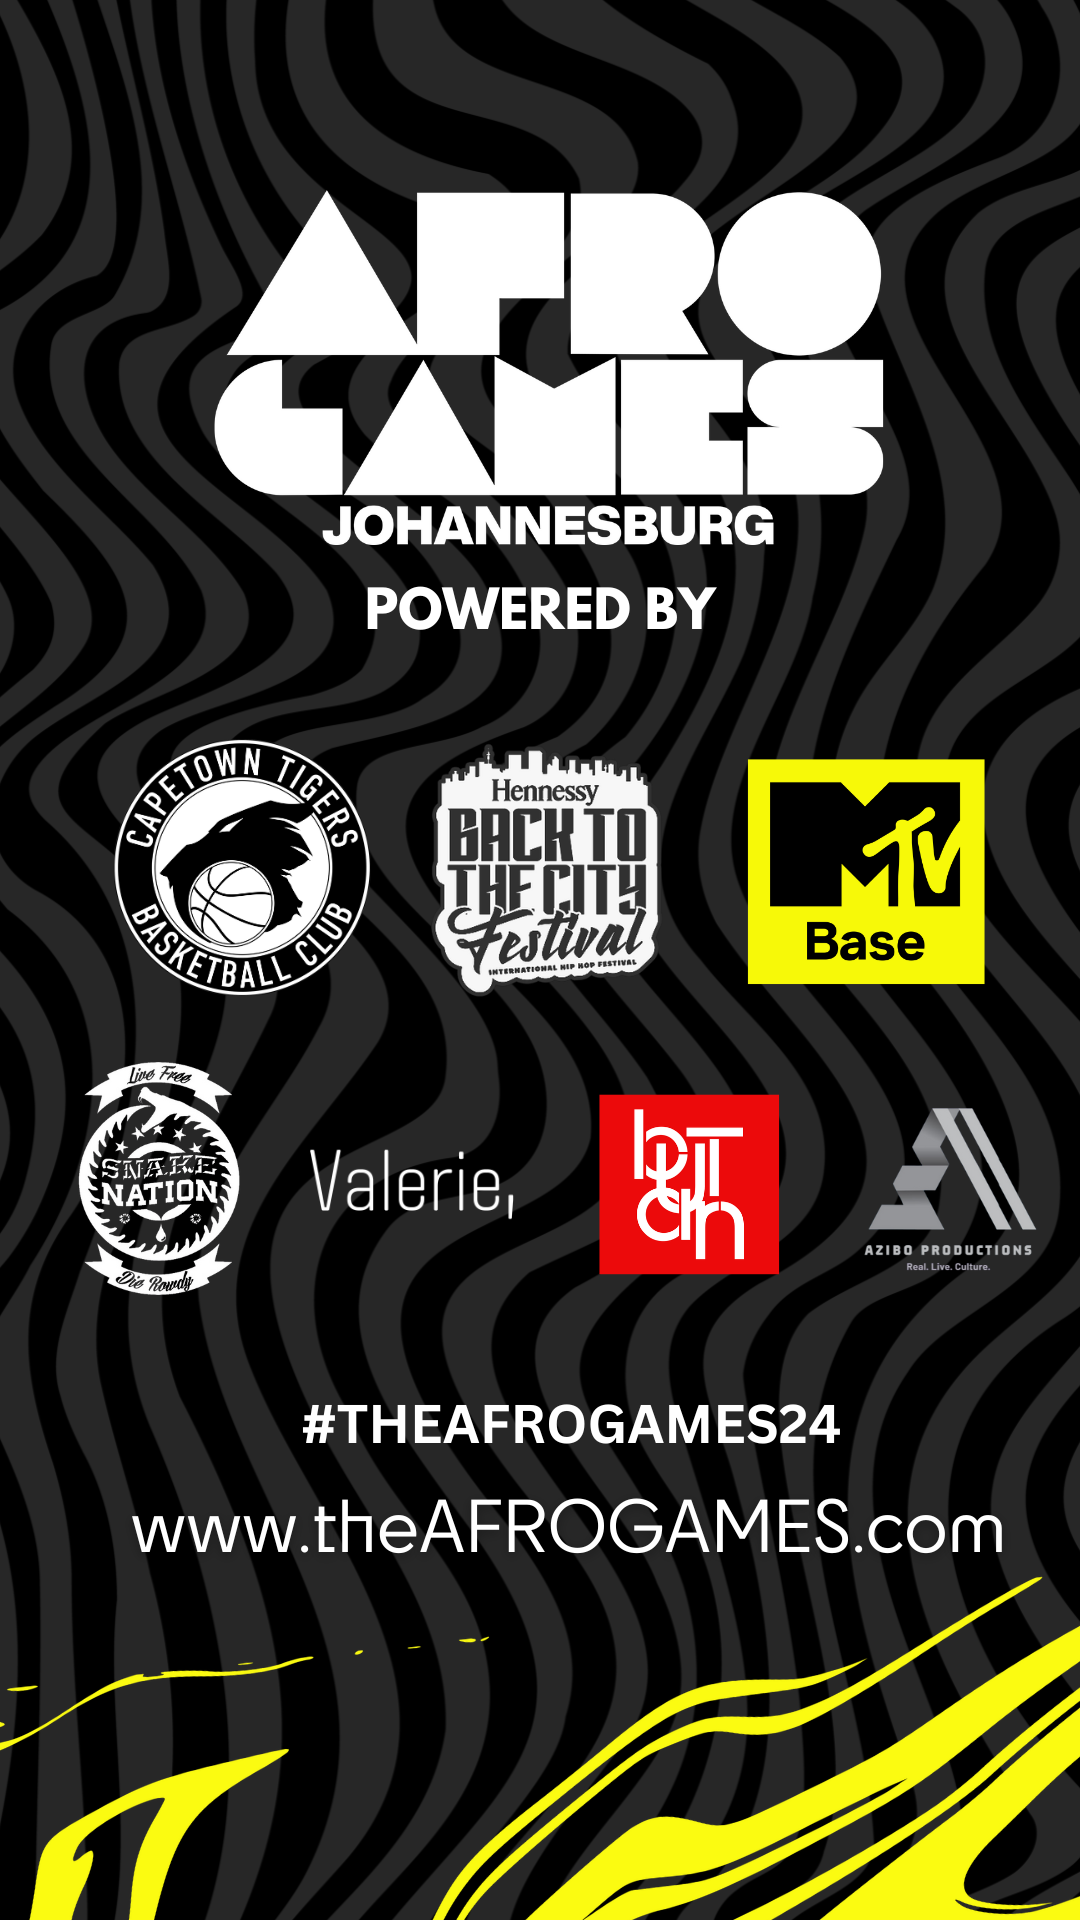 AFROGAMES JOHANNESBURG: A Celebration of Music, Basketball, and Culture for a Cause